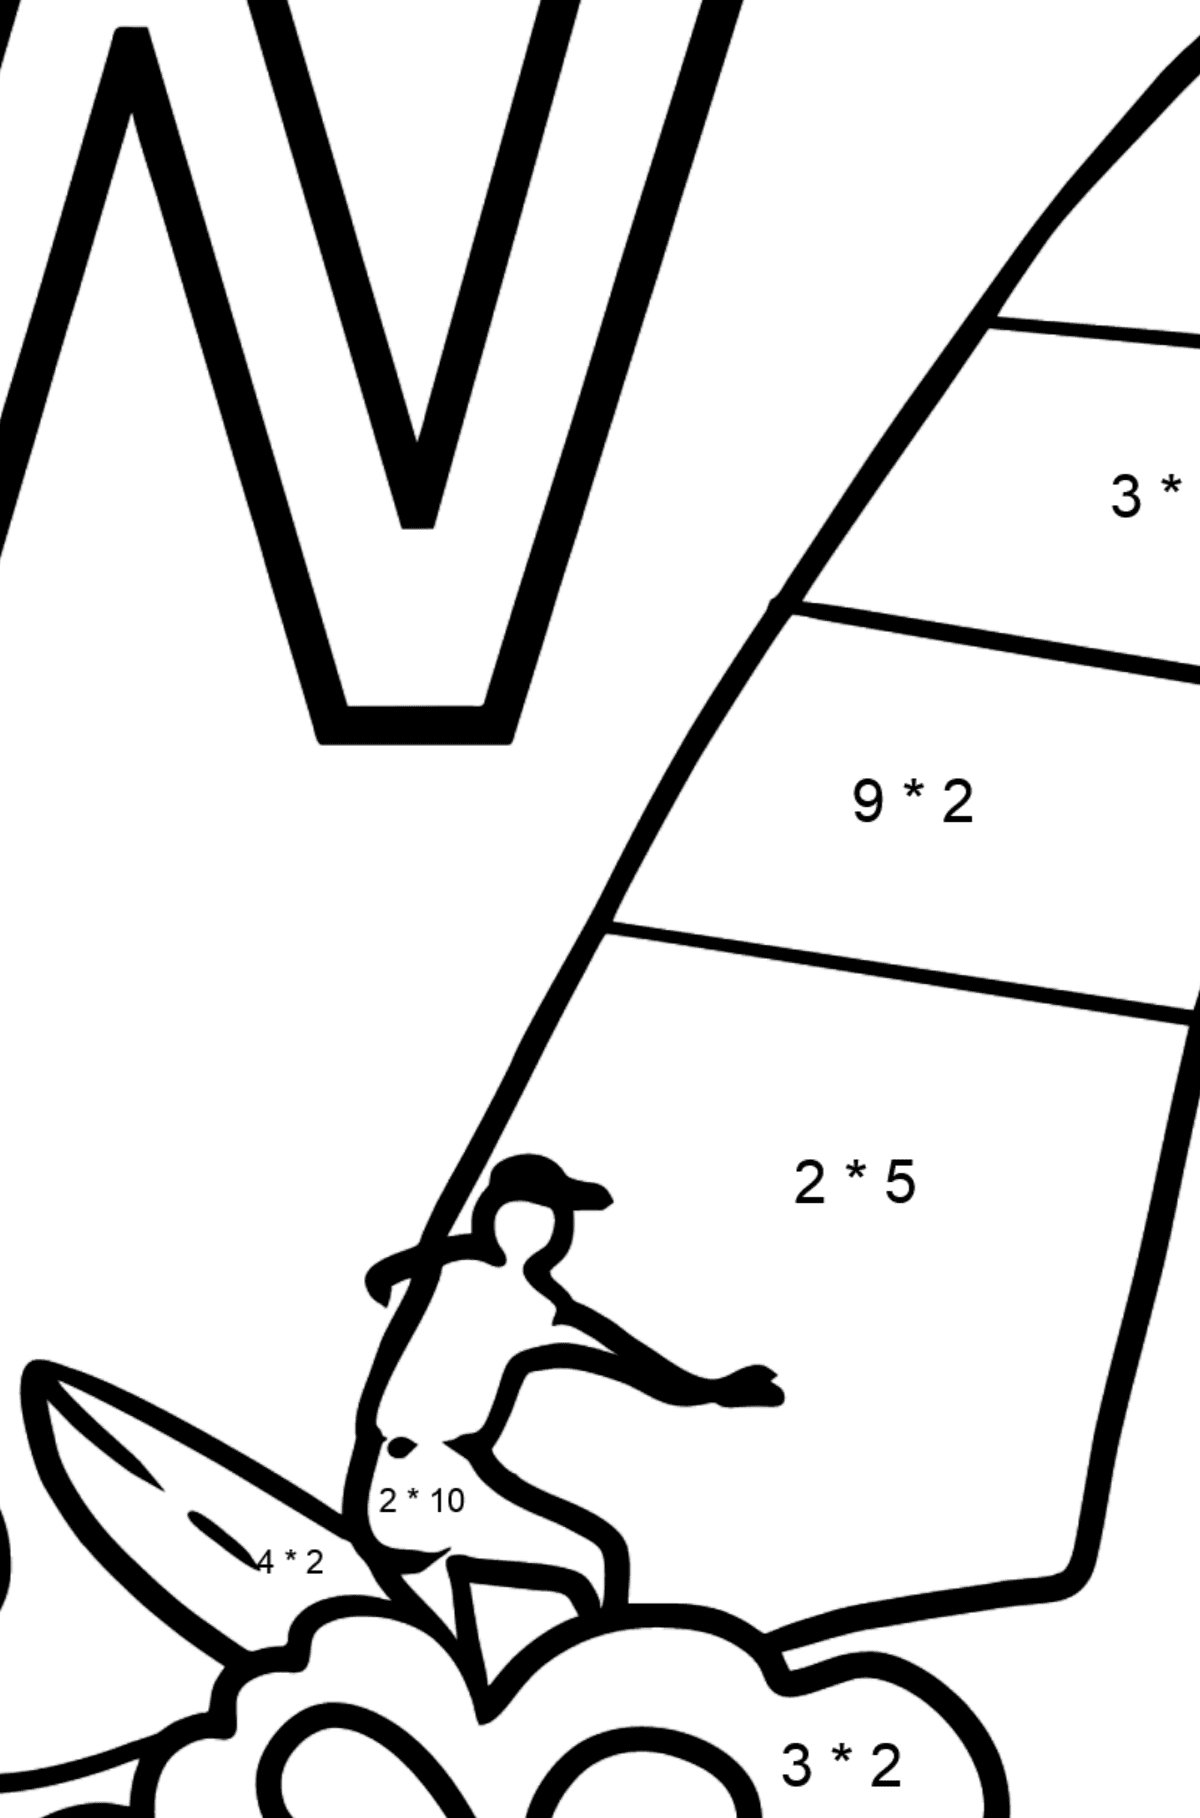 Spanish Letter W coloring pages - WINDSURF - Math Coloring - Multiplication for Kids